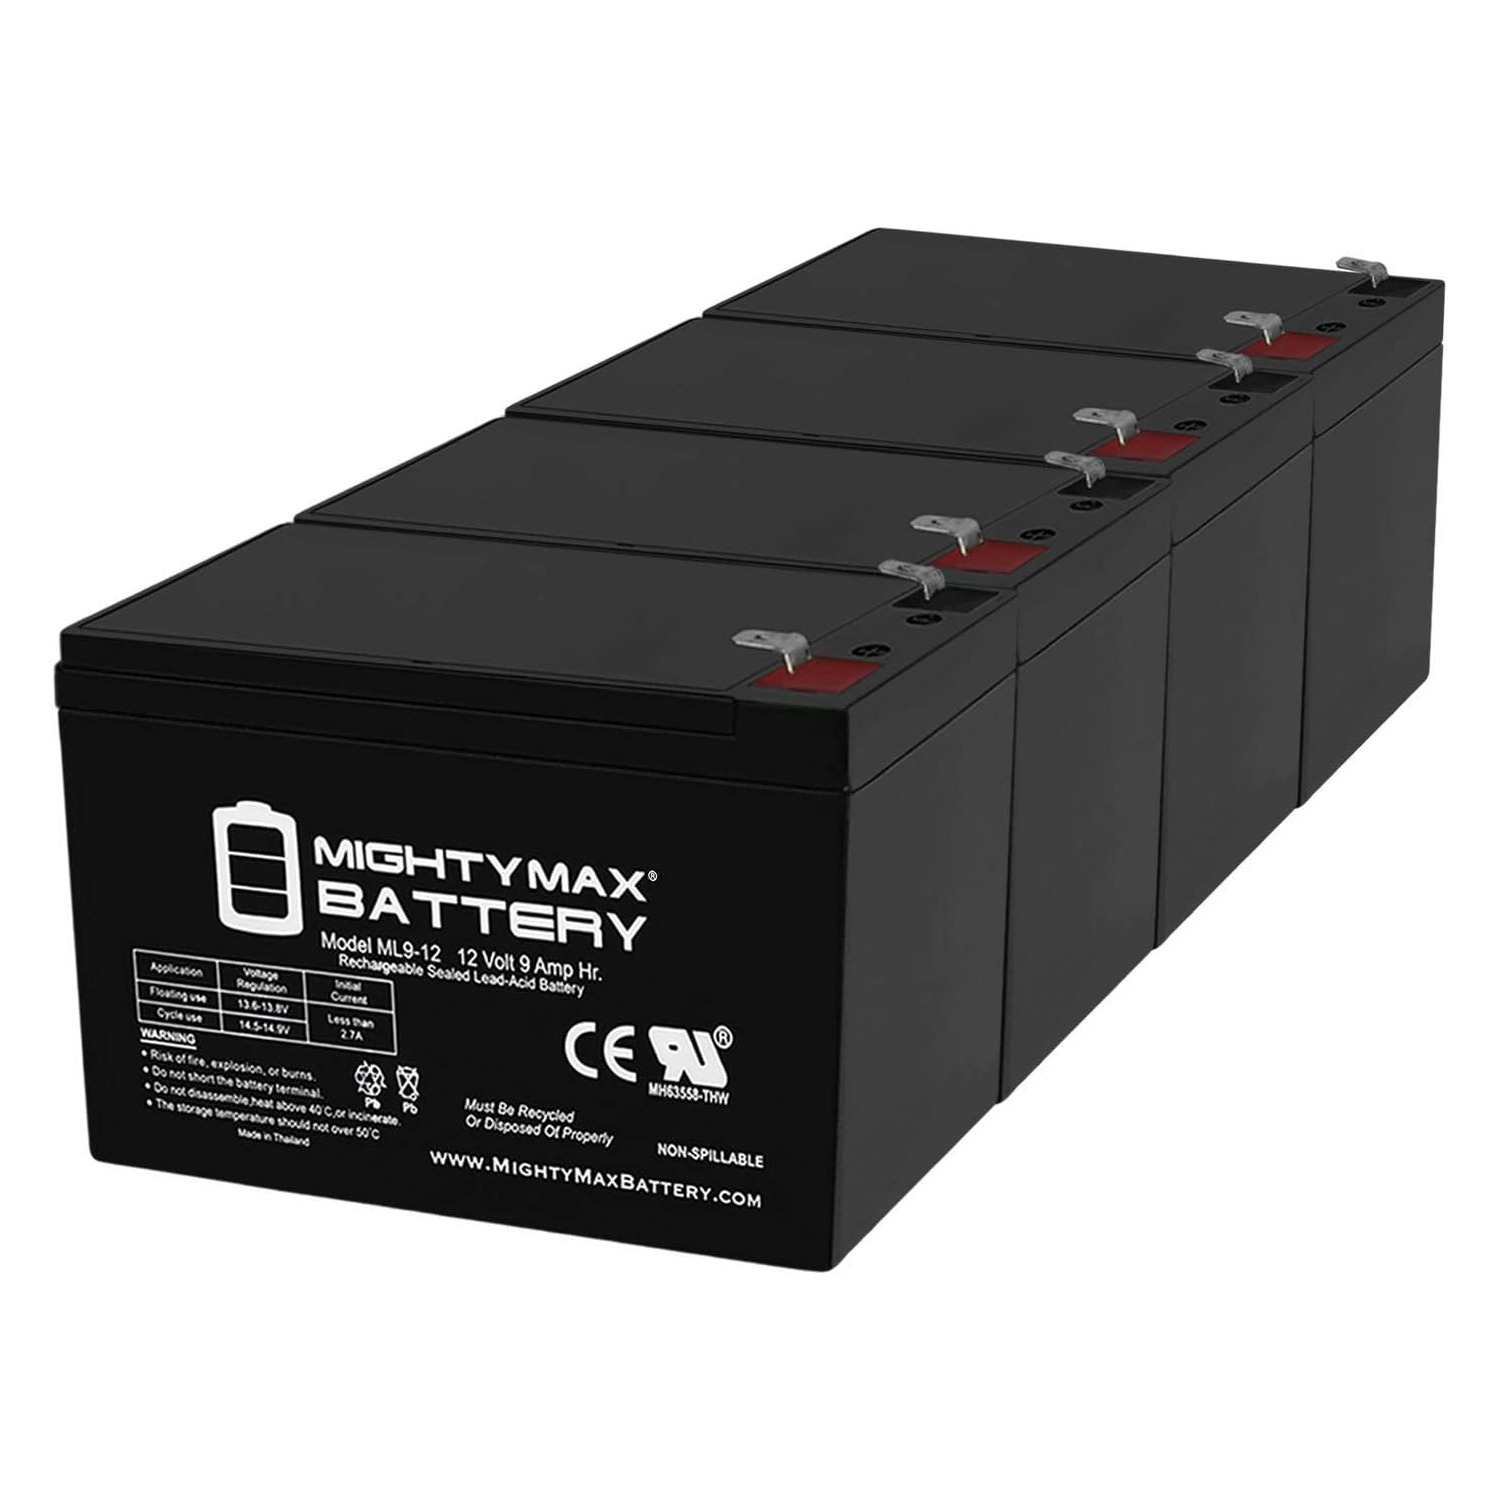 Altronix SMP7PMCTXPD4CB 12V, 9Ah Lead Acid Battery - 4 Pack